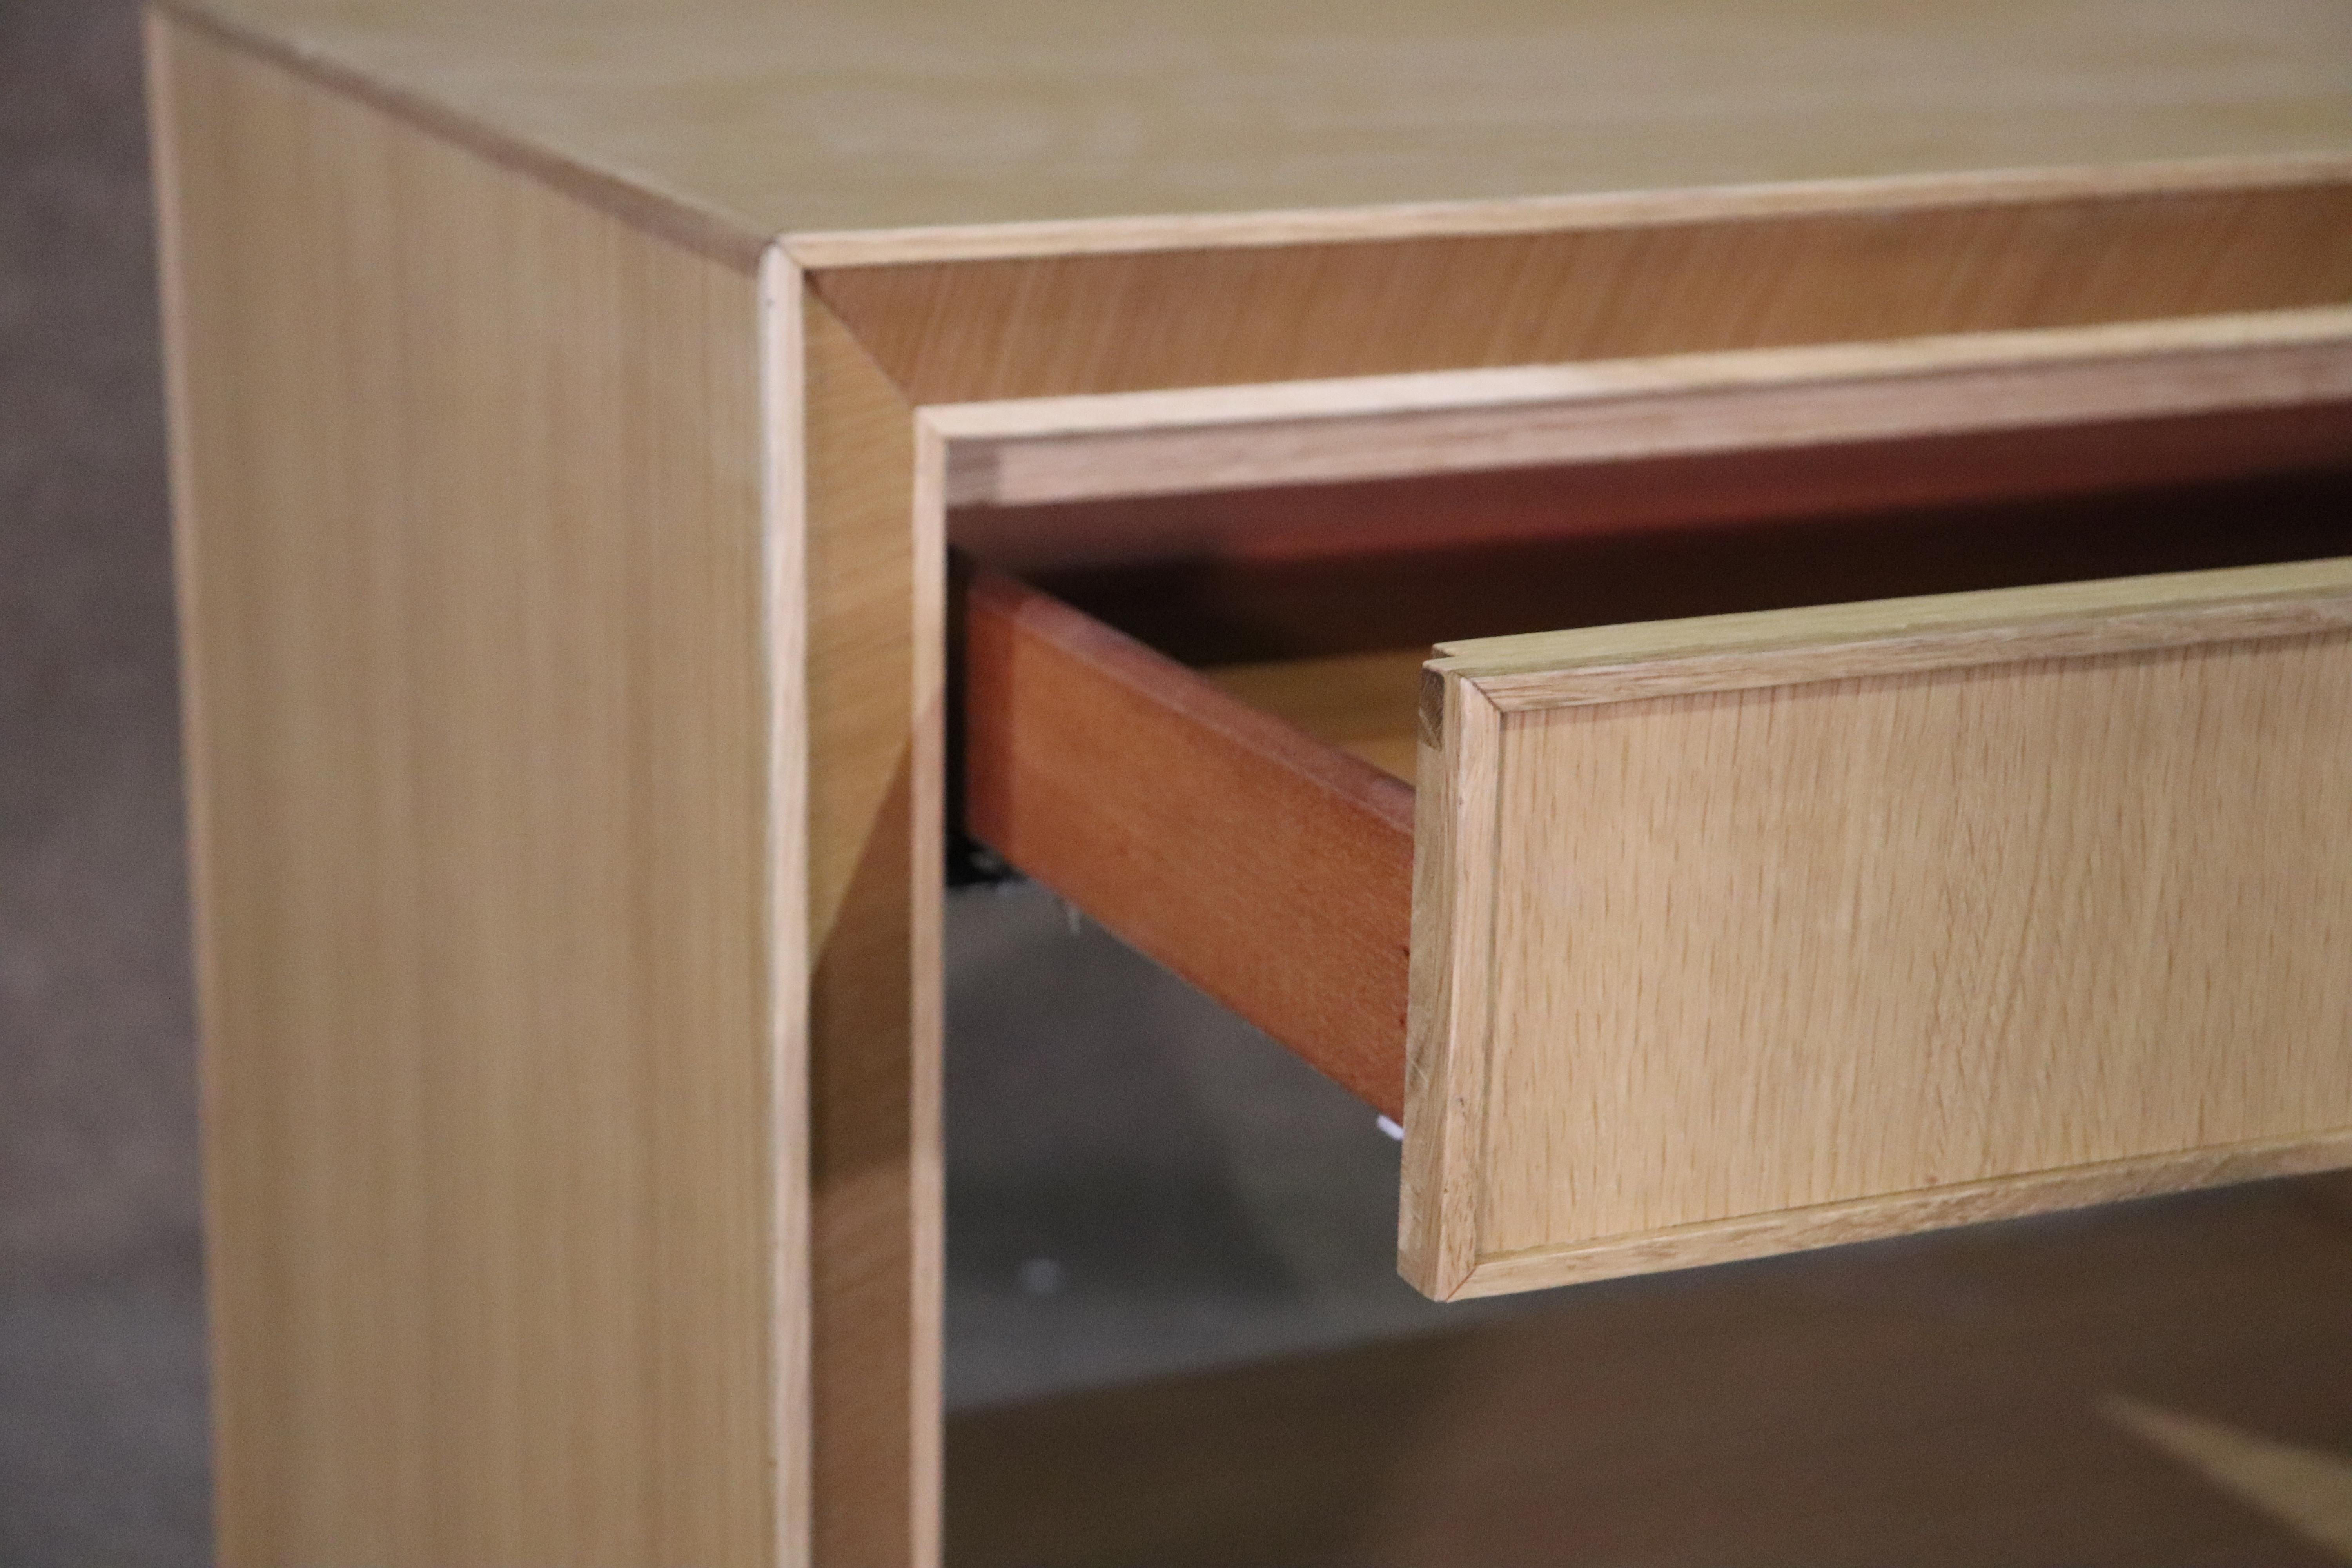 Pair of bedside tables with drawer and open cabinet storage. Beveled edges give these square tables dimension.
Please confirm location NY or NJ